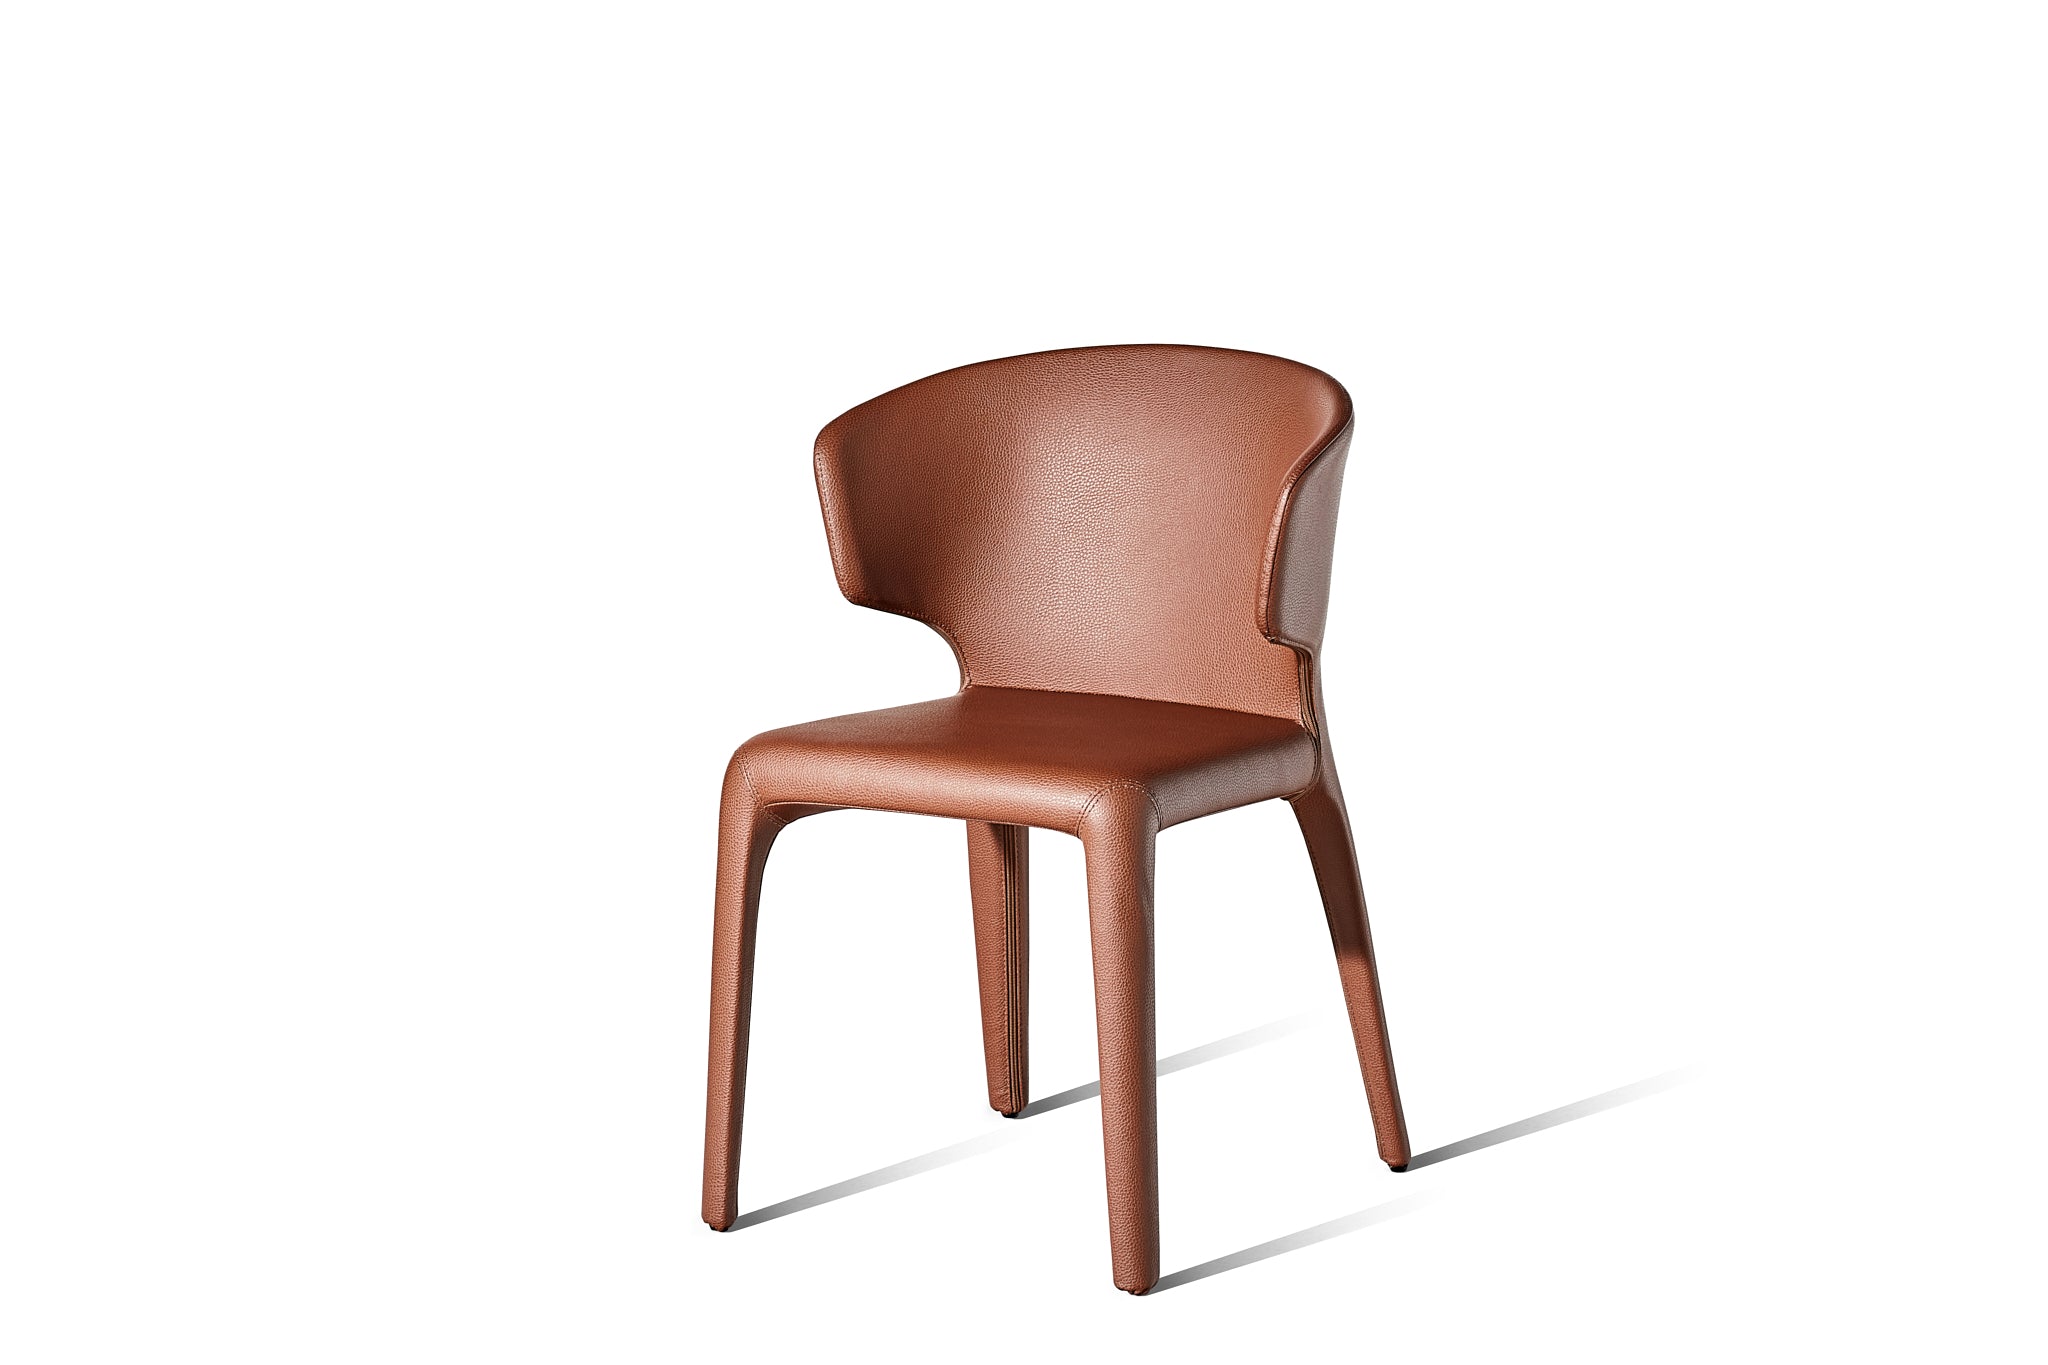 Husk Dining Chair, Tan Faux Leather - 60% OFF - Zuster Furniture